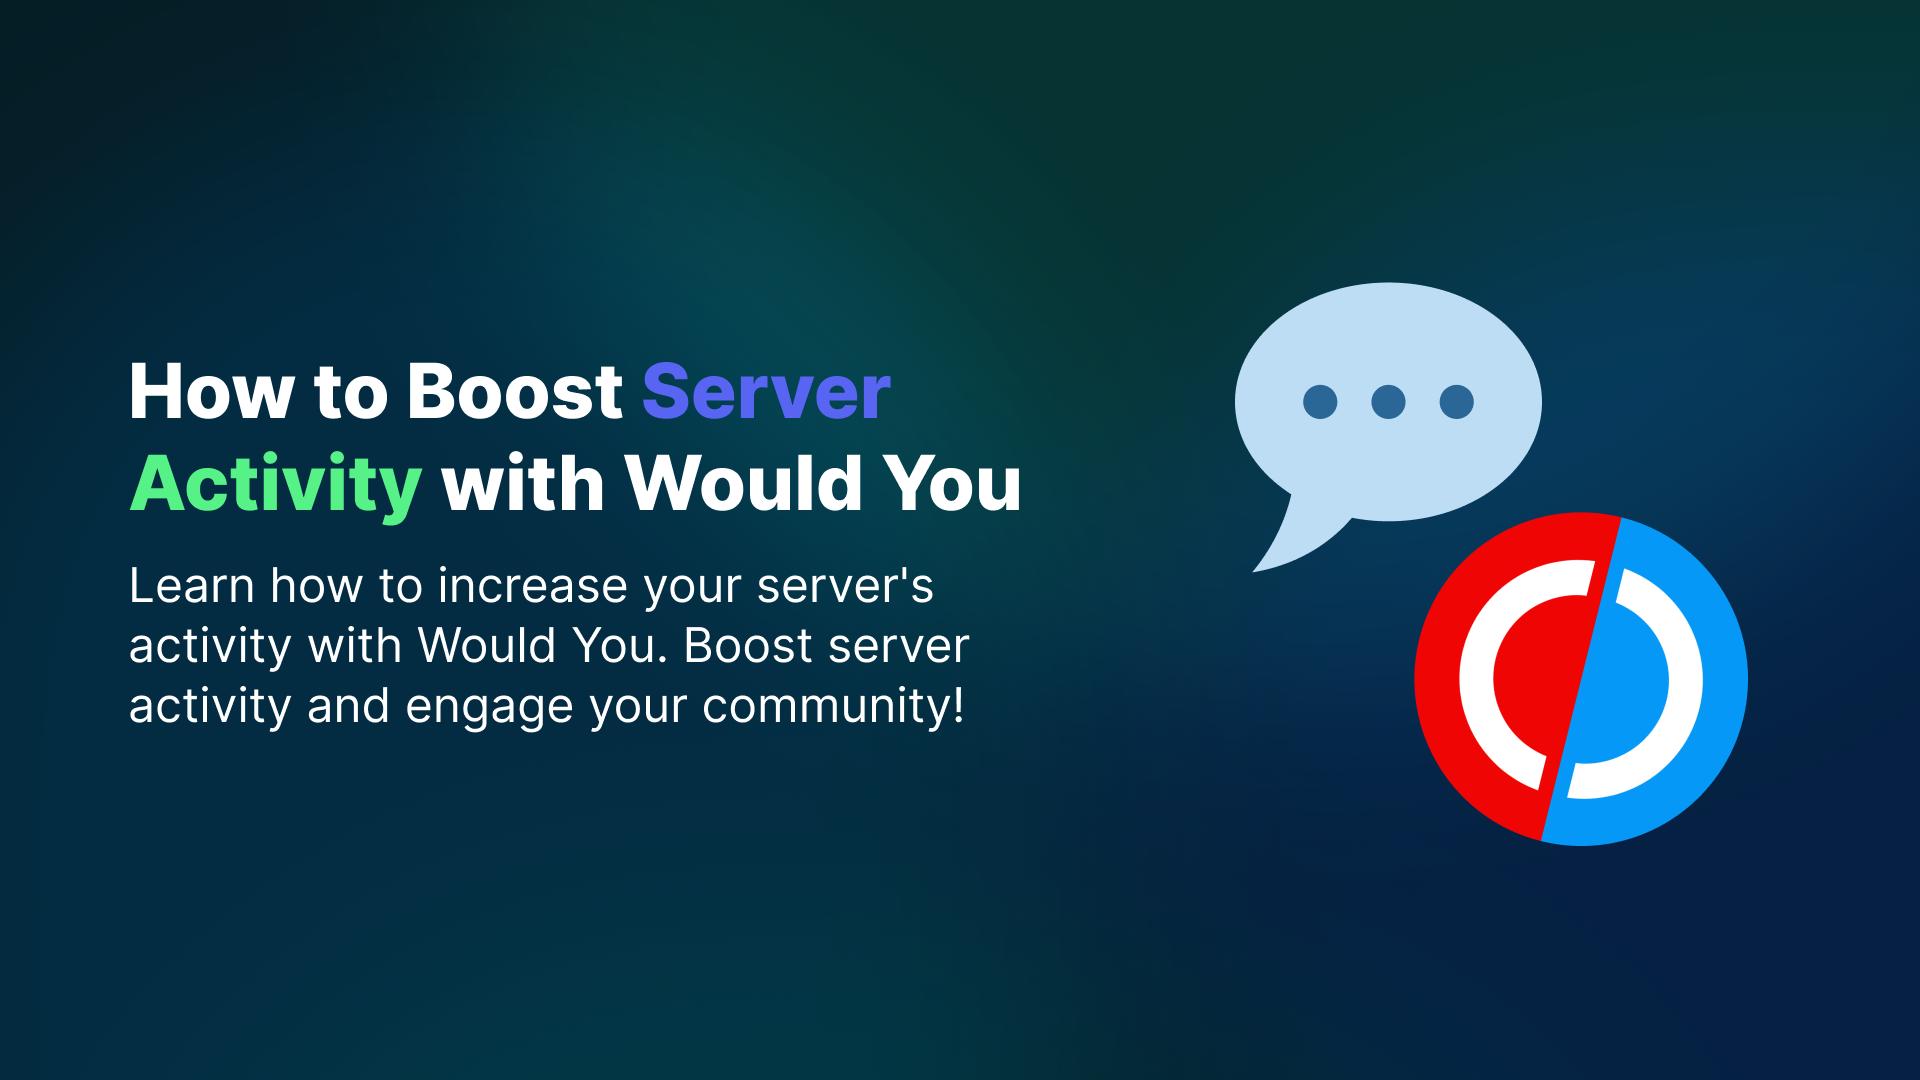 How to Boost Server Activity on Discord